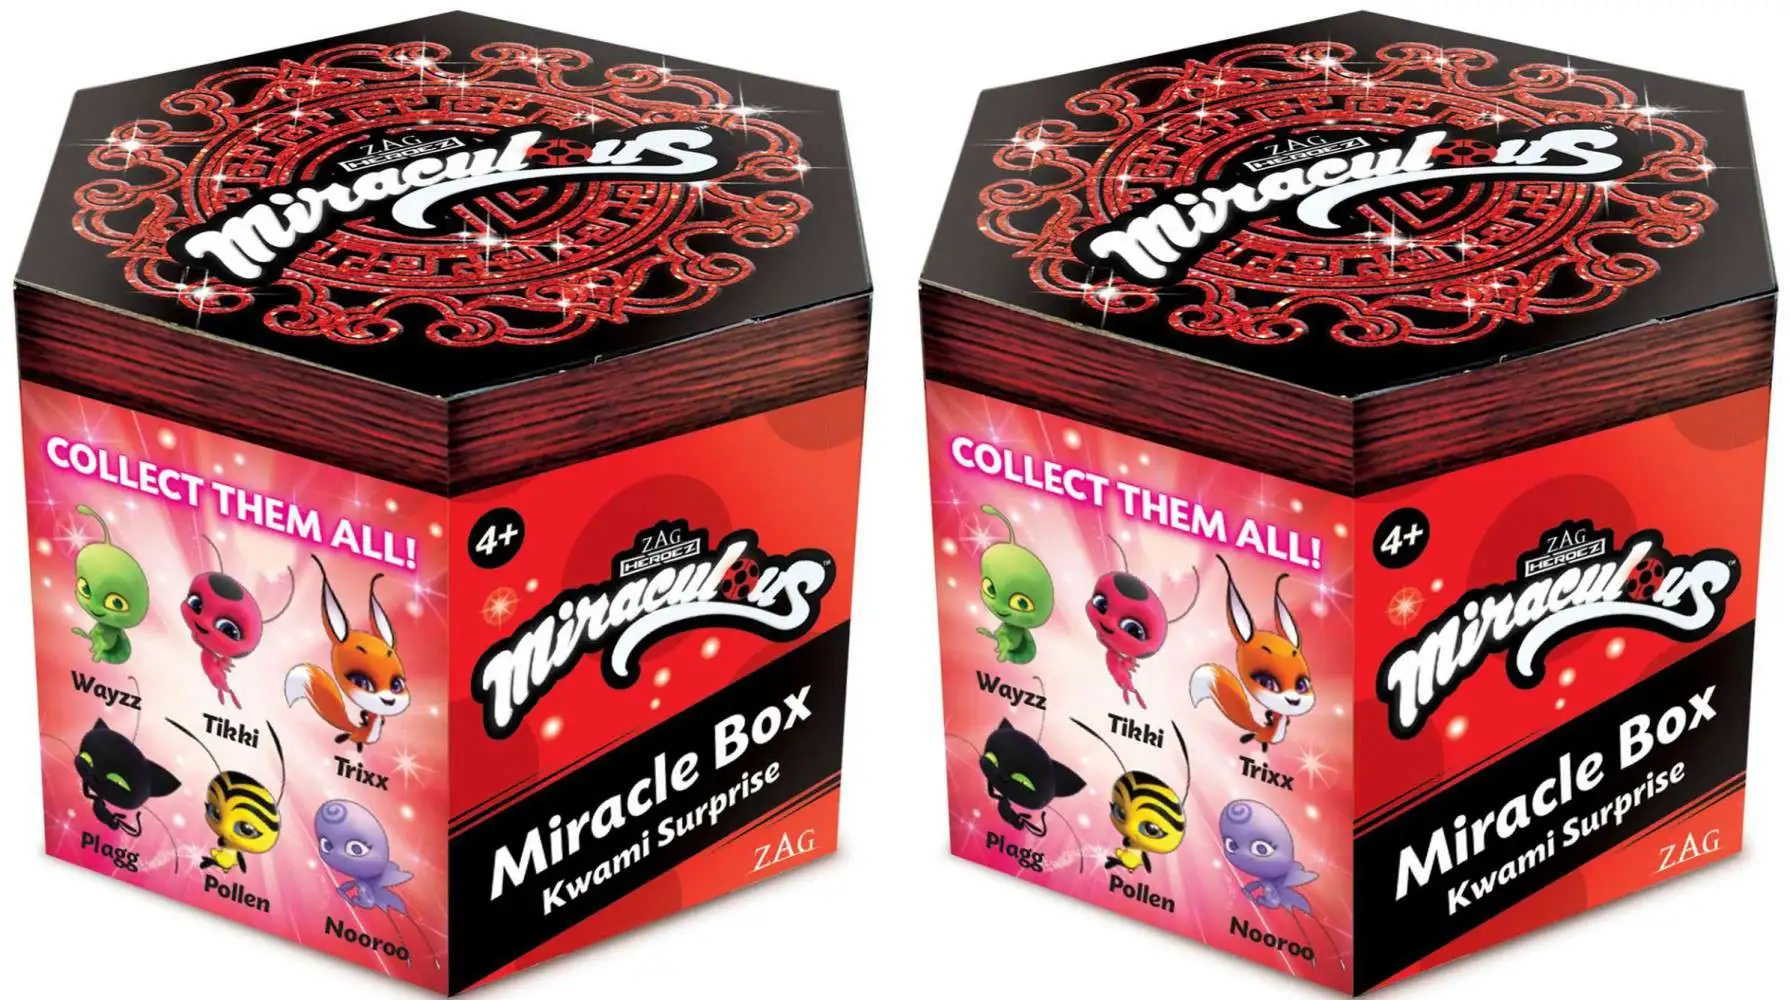 Miraculous Miracle Box Kwami Surprise - Blind Box - One of 6